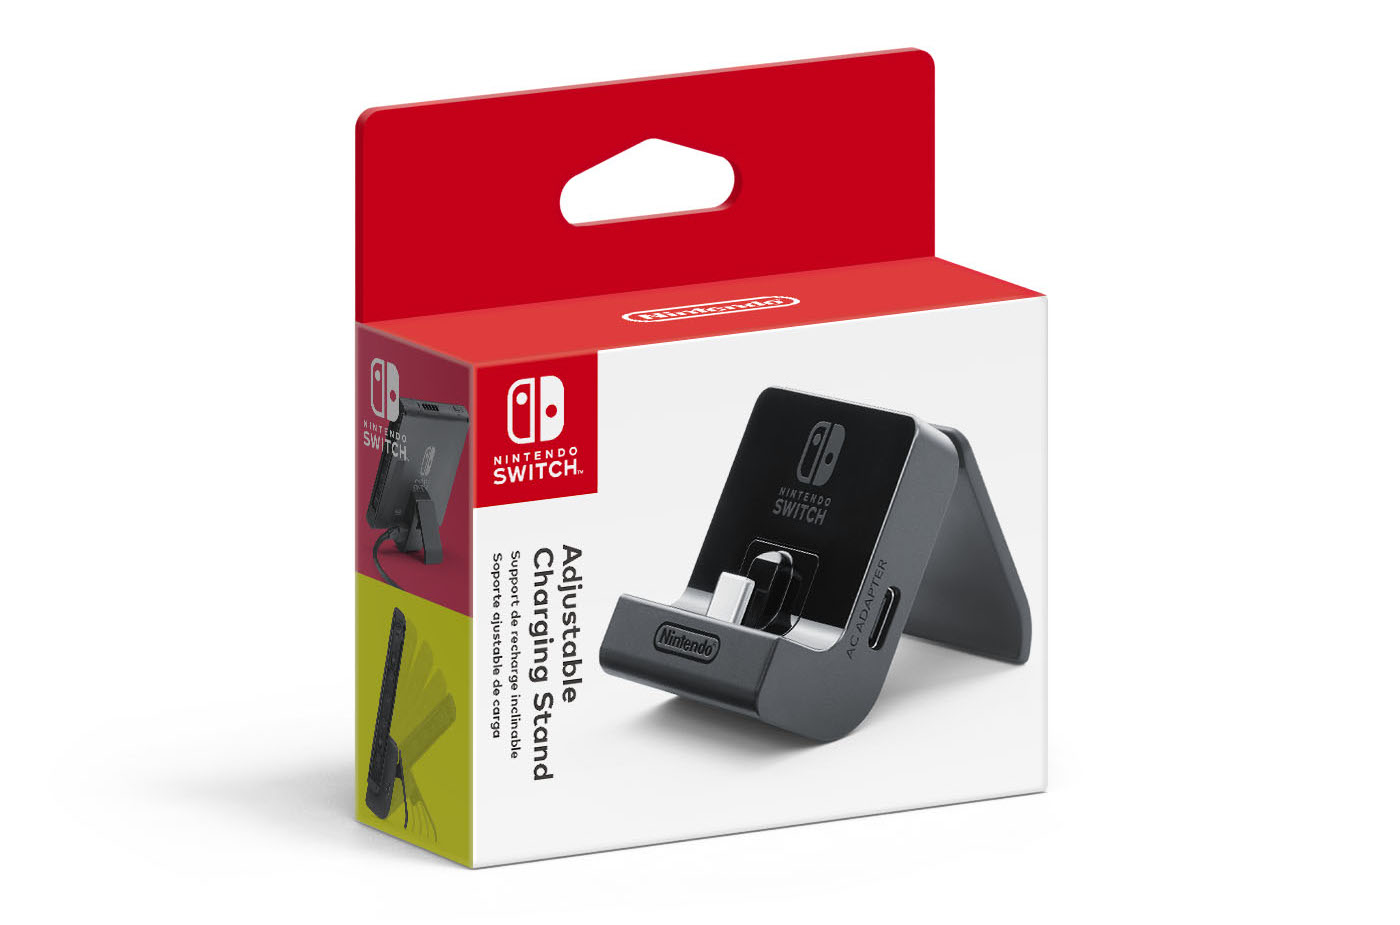 Nintendo Switch Adjustable Charging Stand Packaging